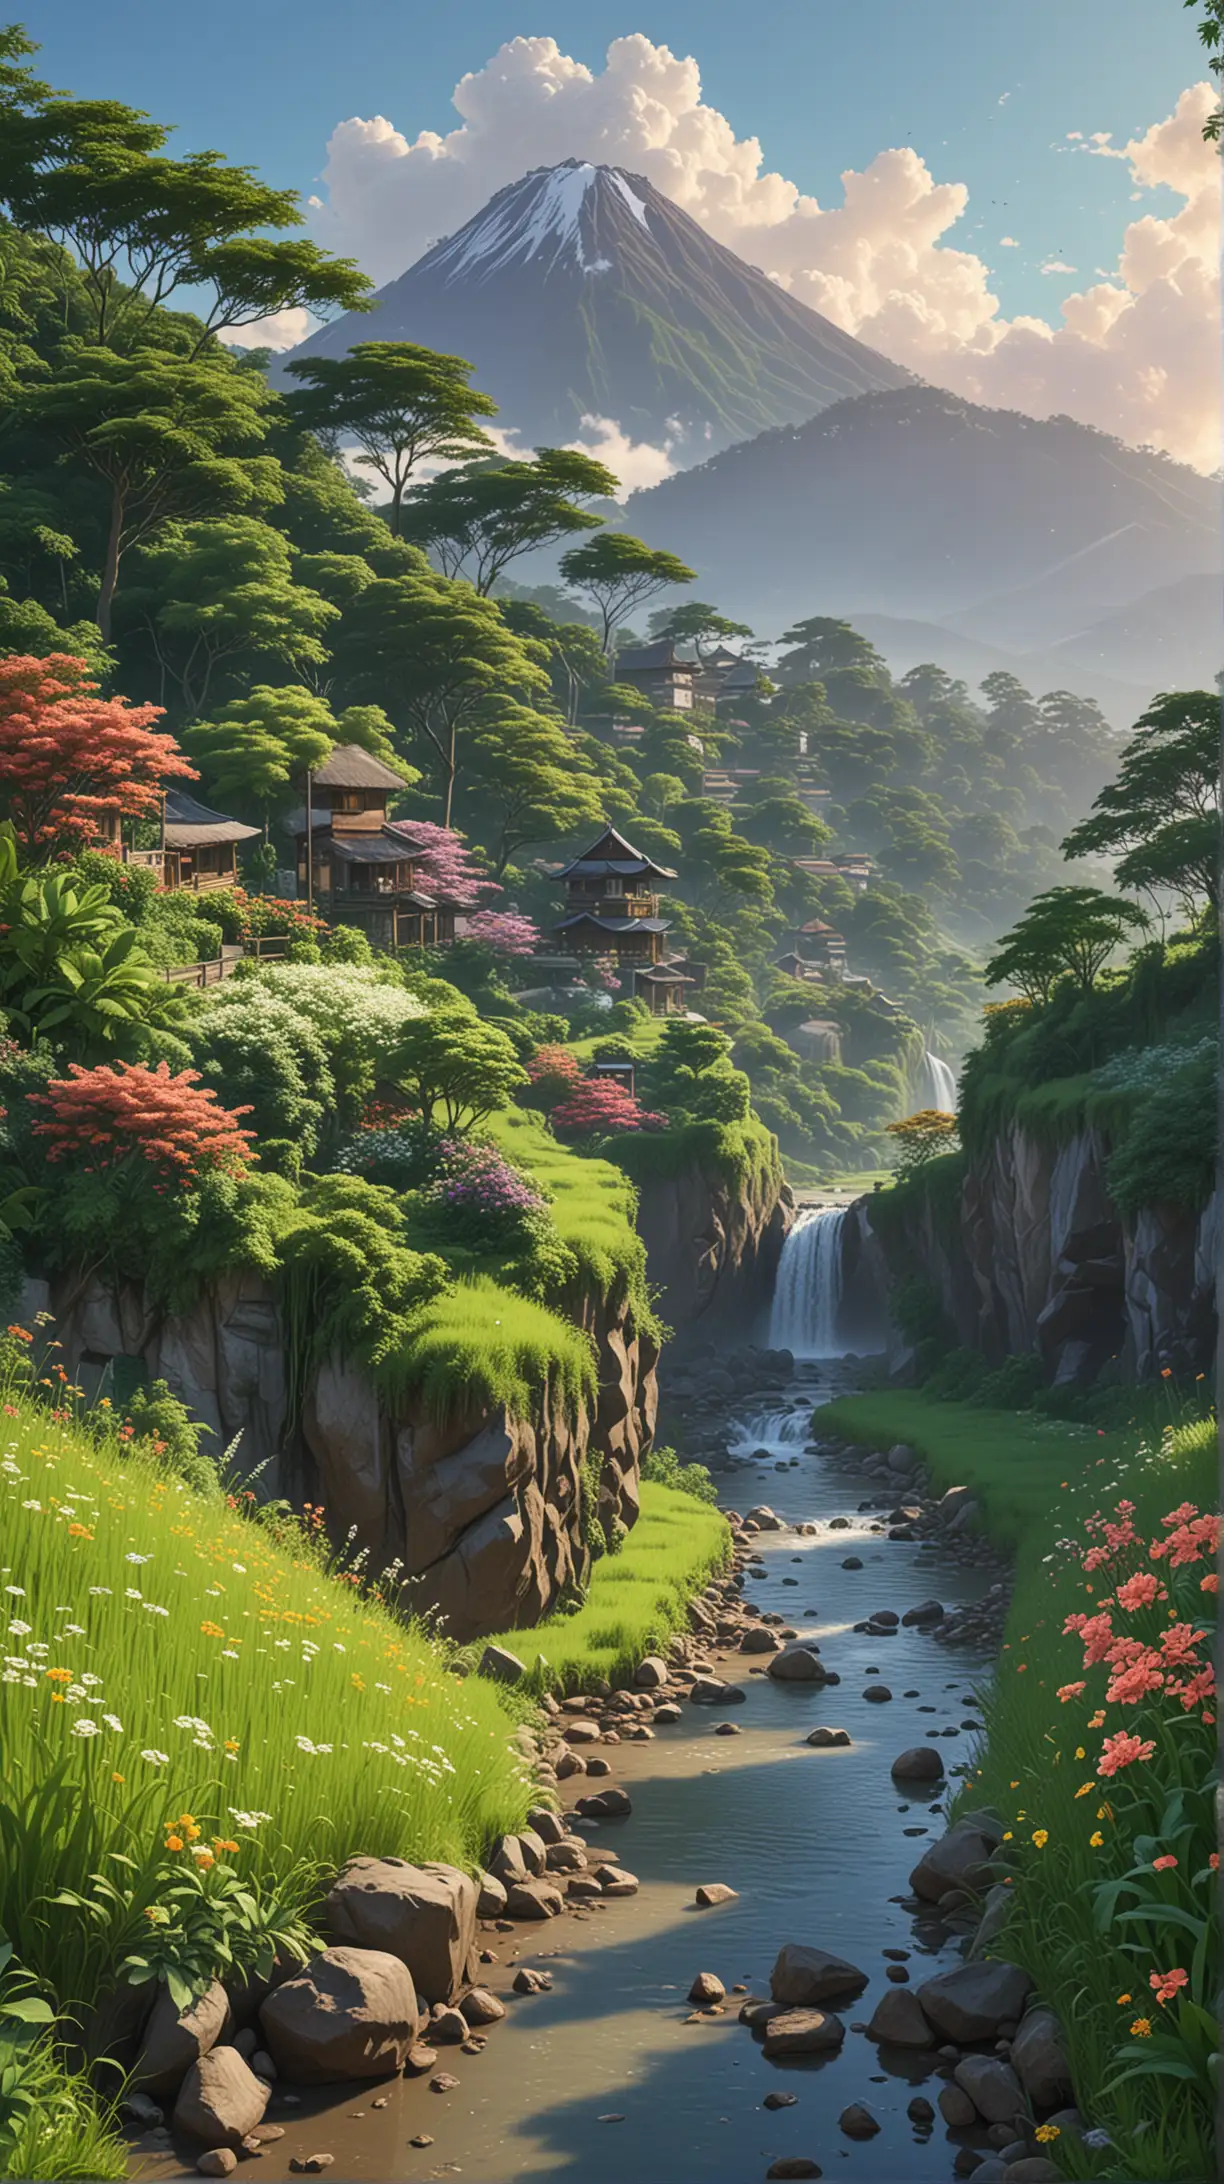 Bali Valley Rice Fields at Sunrise with Vibrant Flowers and Waterfall 8K UltraDetailed Anime Wallpaper